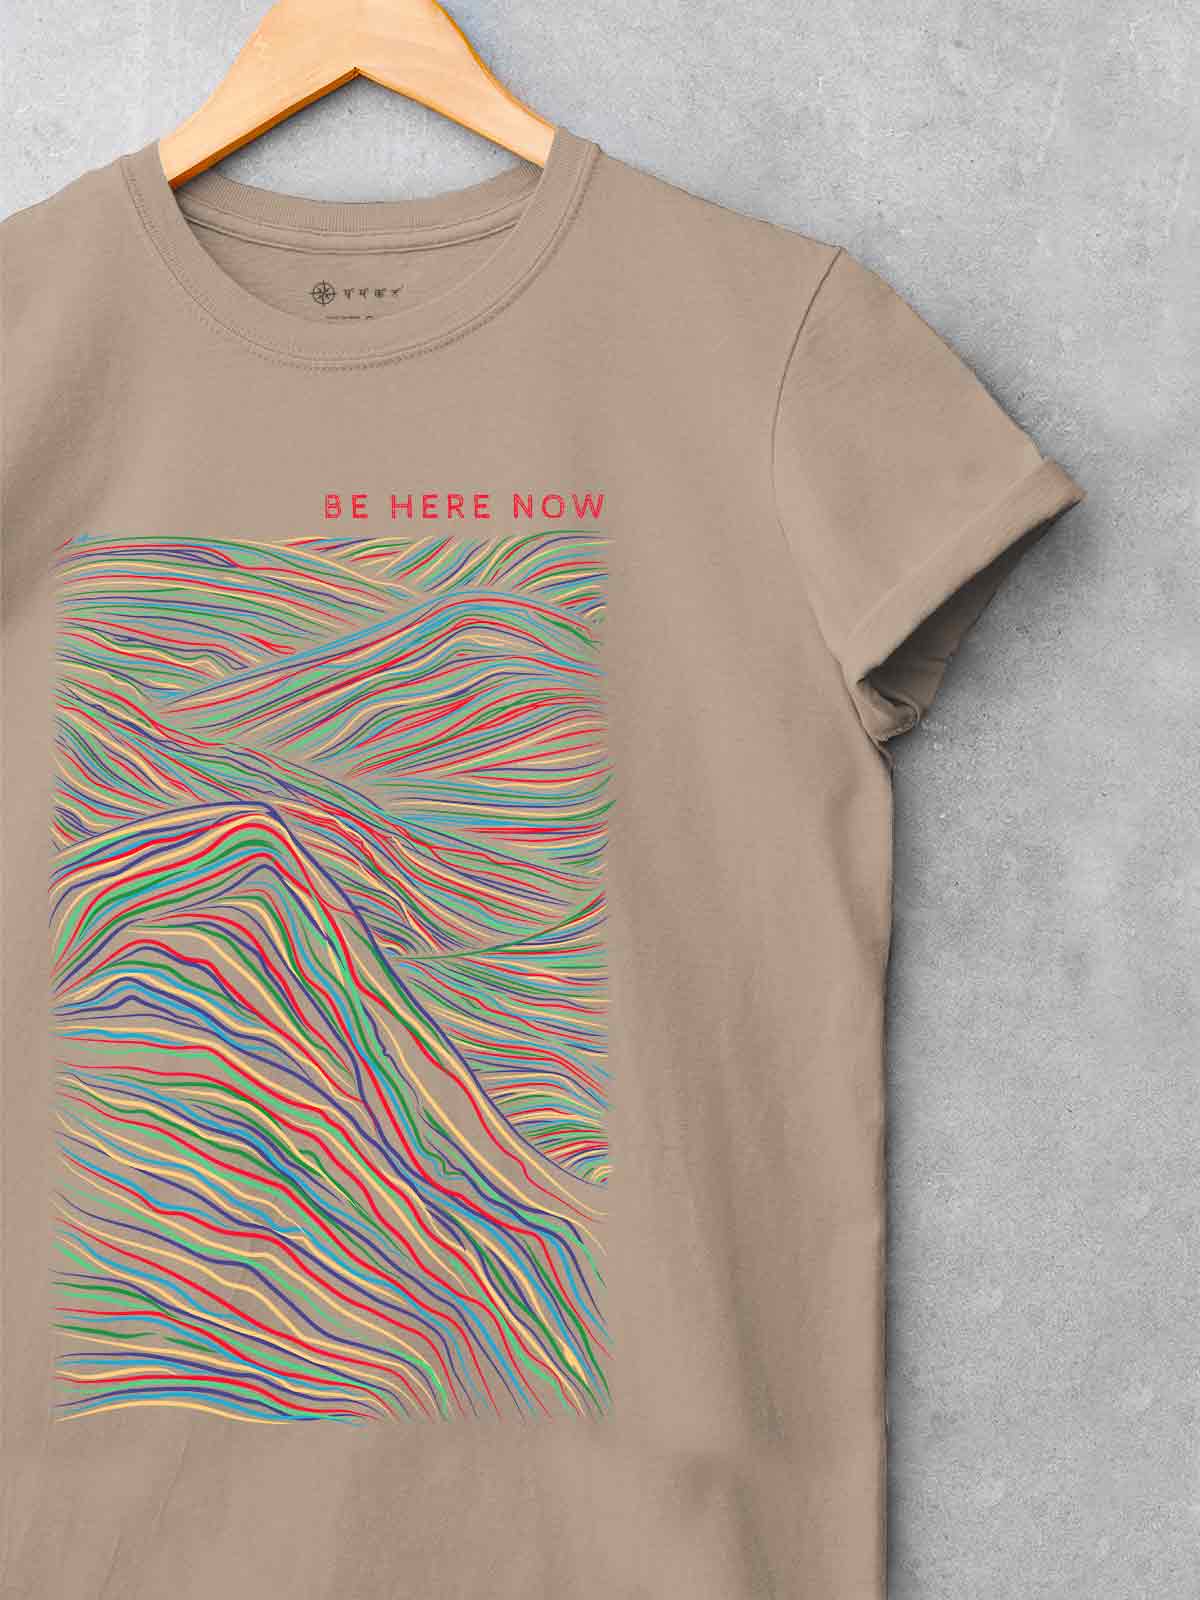 Be-there-now-Printed-t-shirt-for-men by Ghumakkad